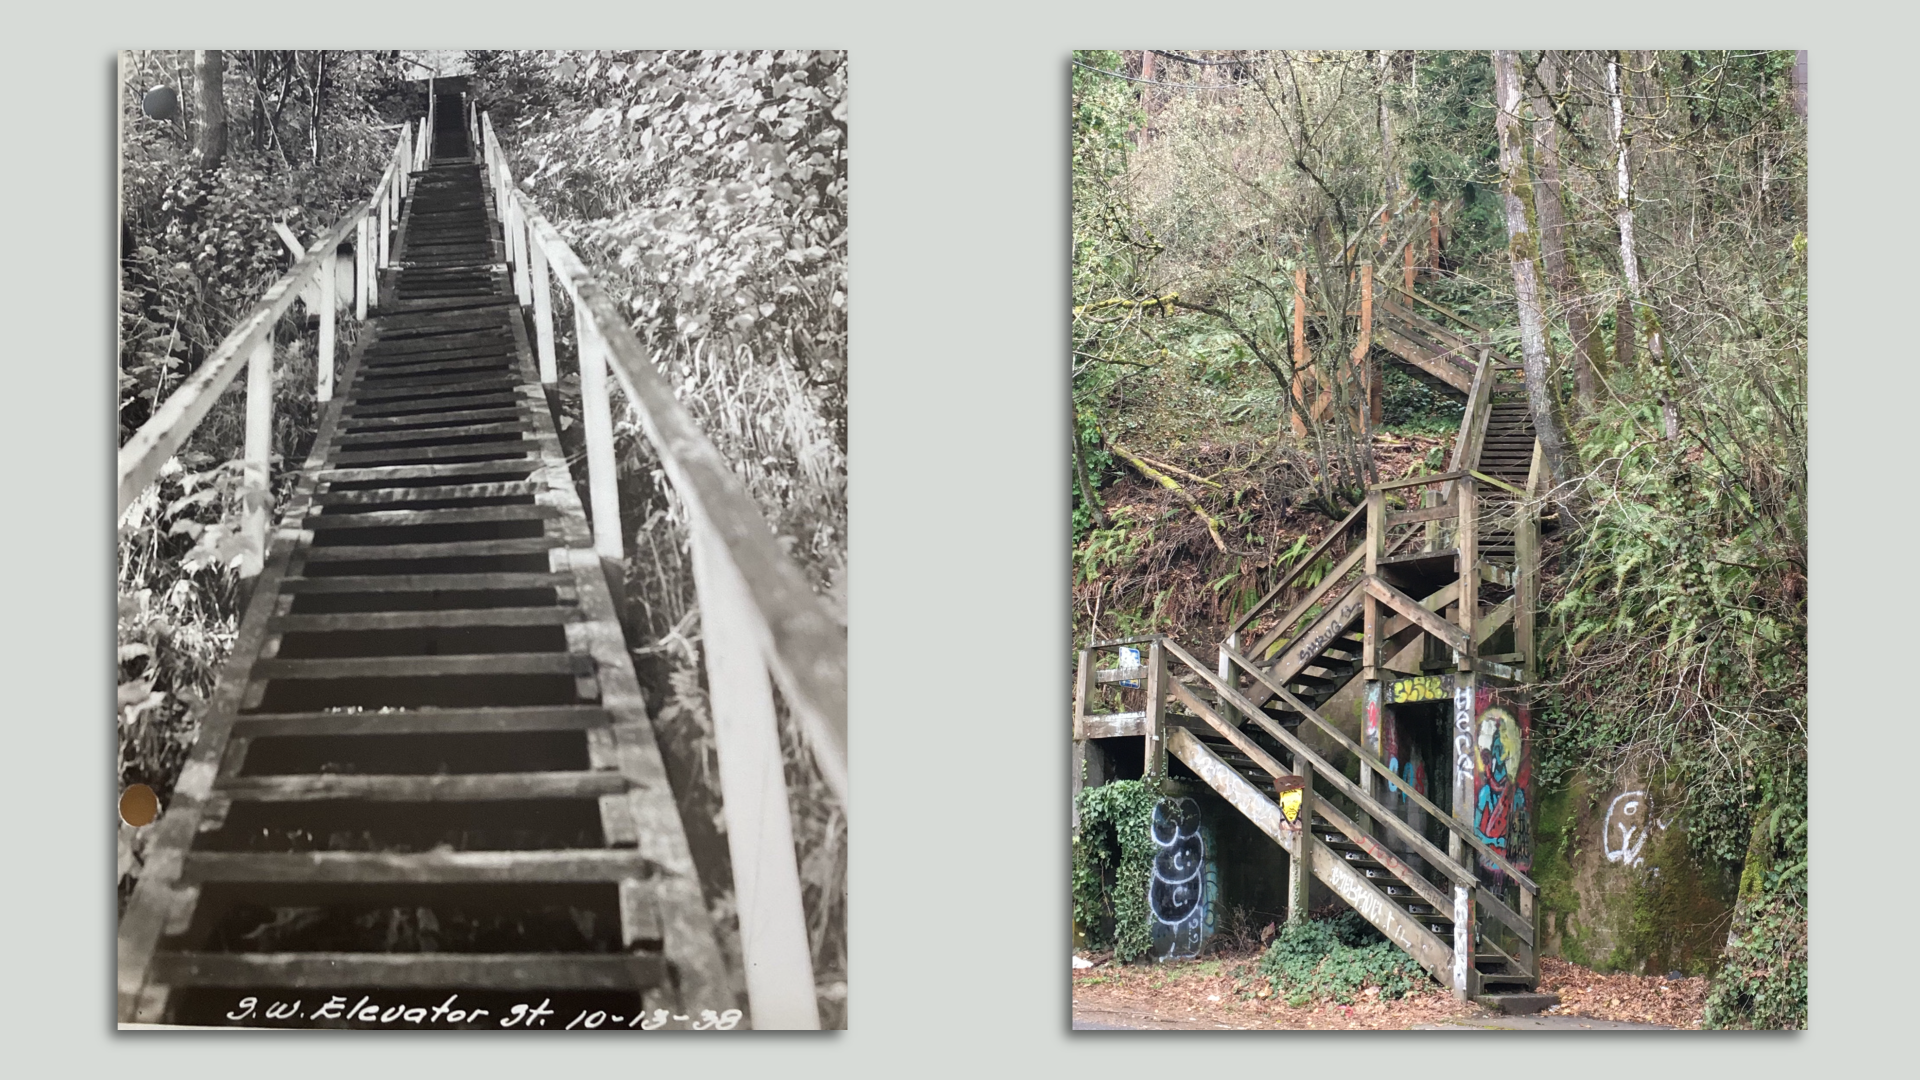 A black and white archival picture of a set of wooden stairs going straight up a steep hill next to a color photo of newer wooden steps on the same slope, with multiple turns and landings.